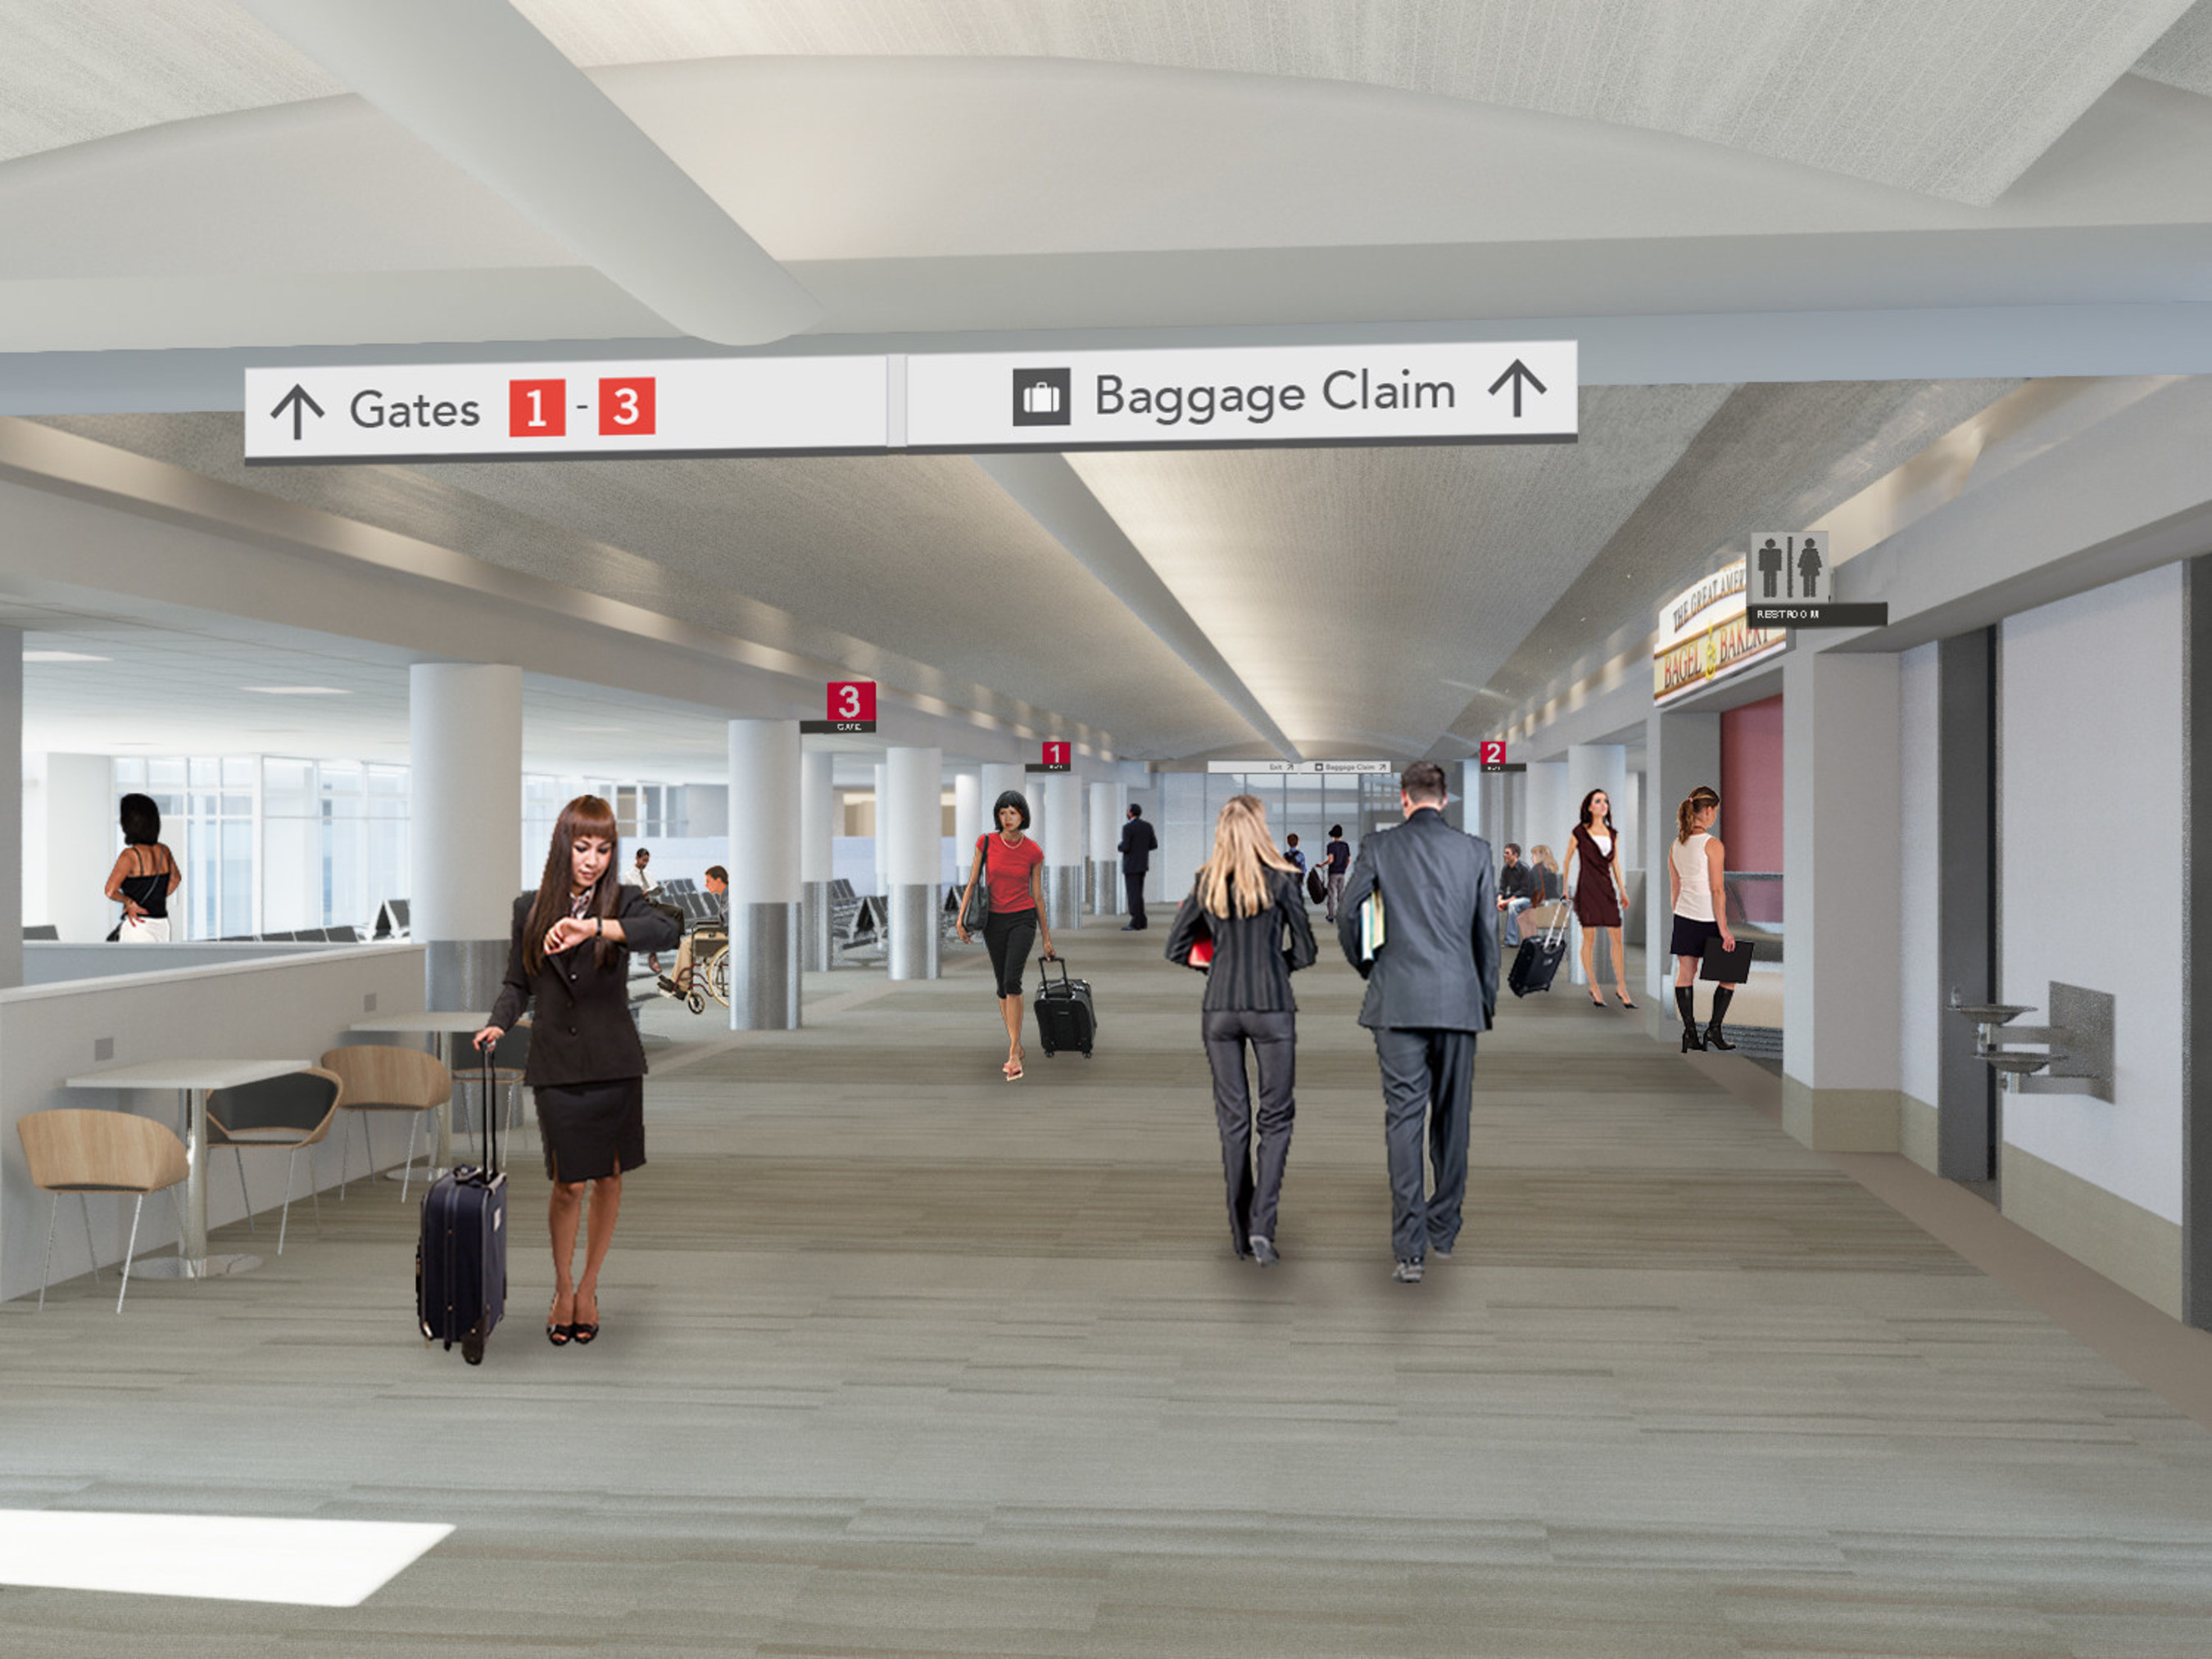 A rendering shows the updated concourse at Bill and Hillary Clinton National Airport in Little Rock, Ark. with a brighter, more open appearance following renovation efforts that are expected to be finished in fall 2017.